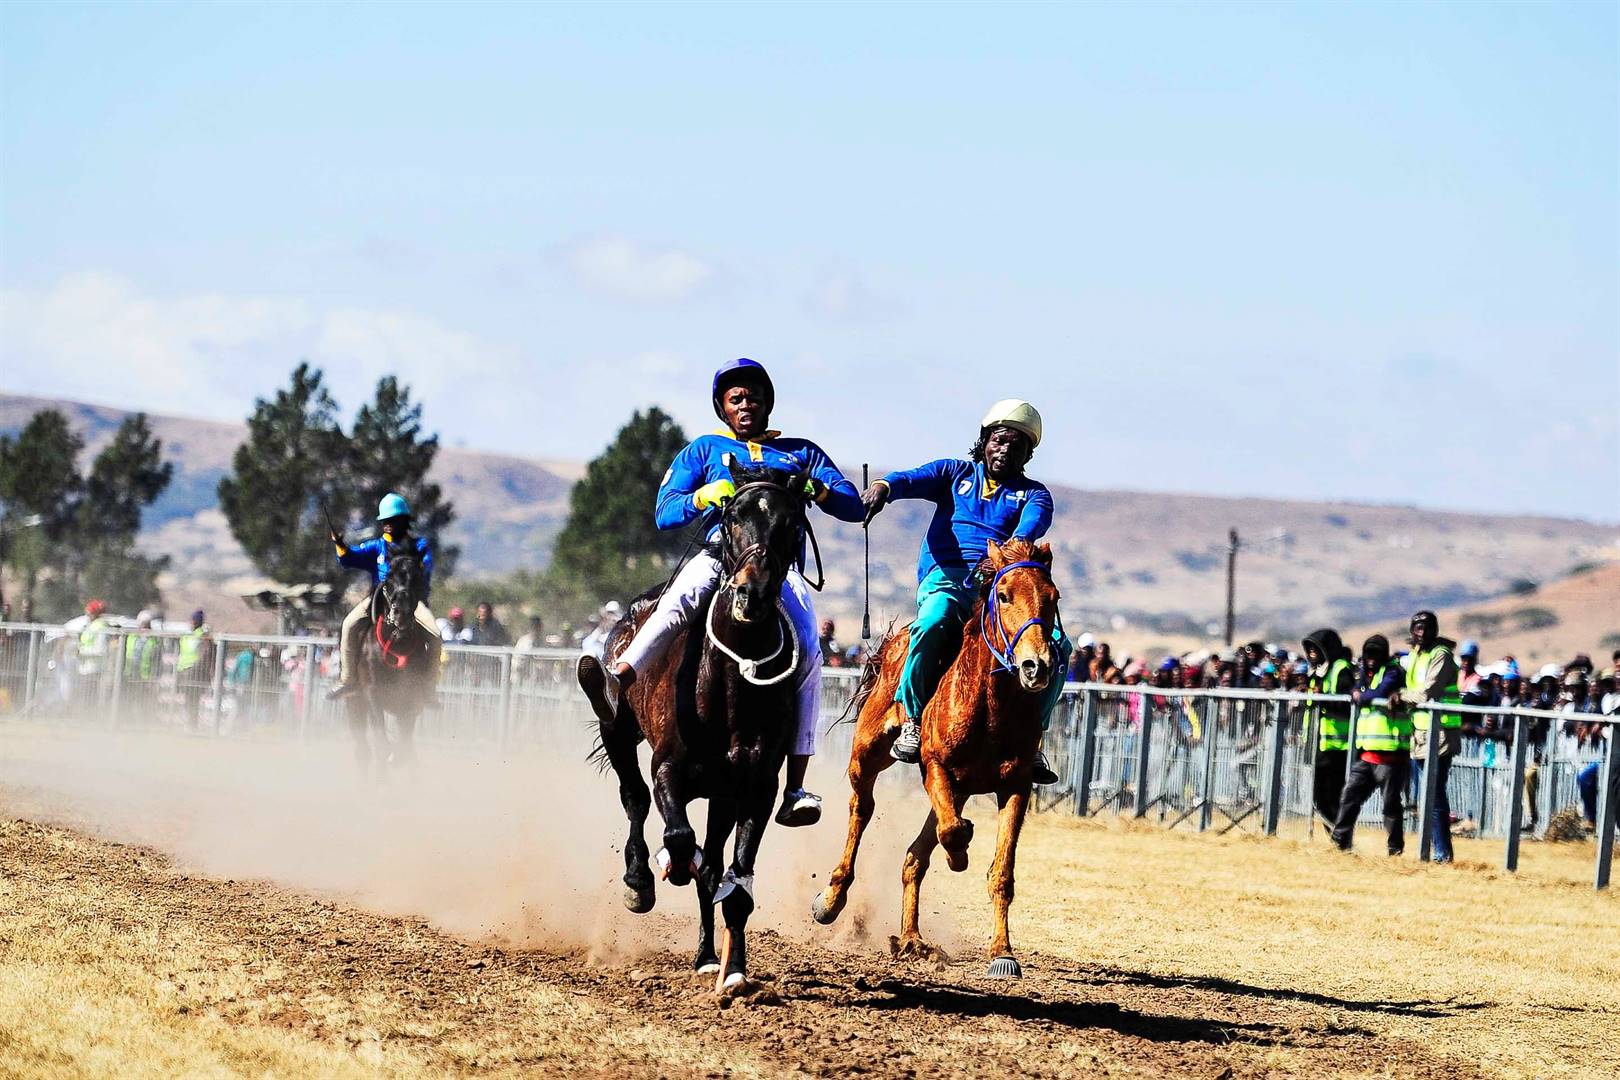 Racers during a race at the 14th edition of the Dundee July on Saturday. Picture: Rosetta Msimango